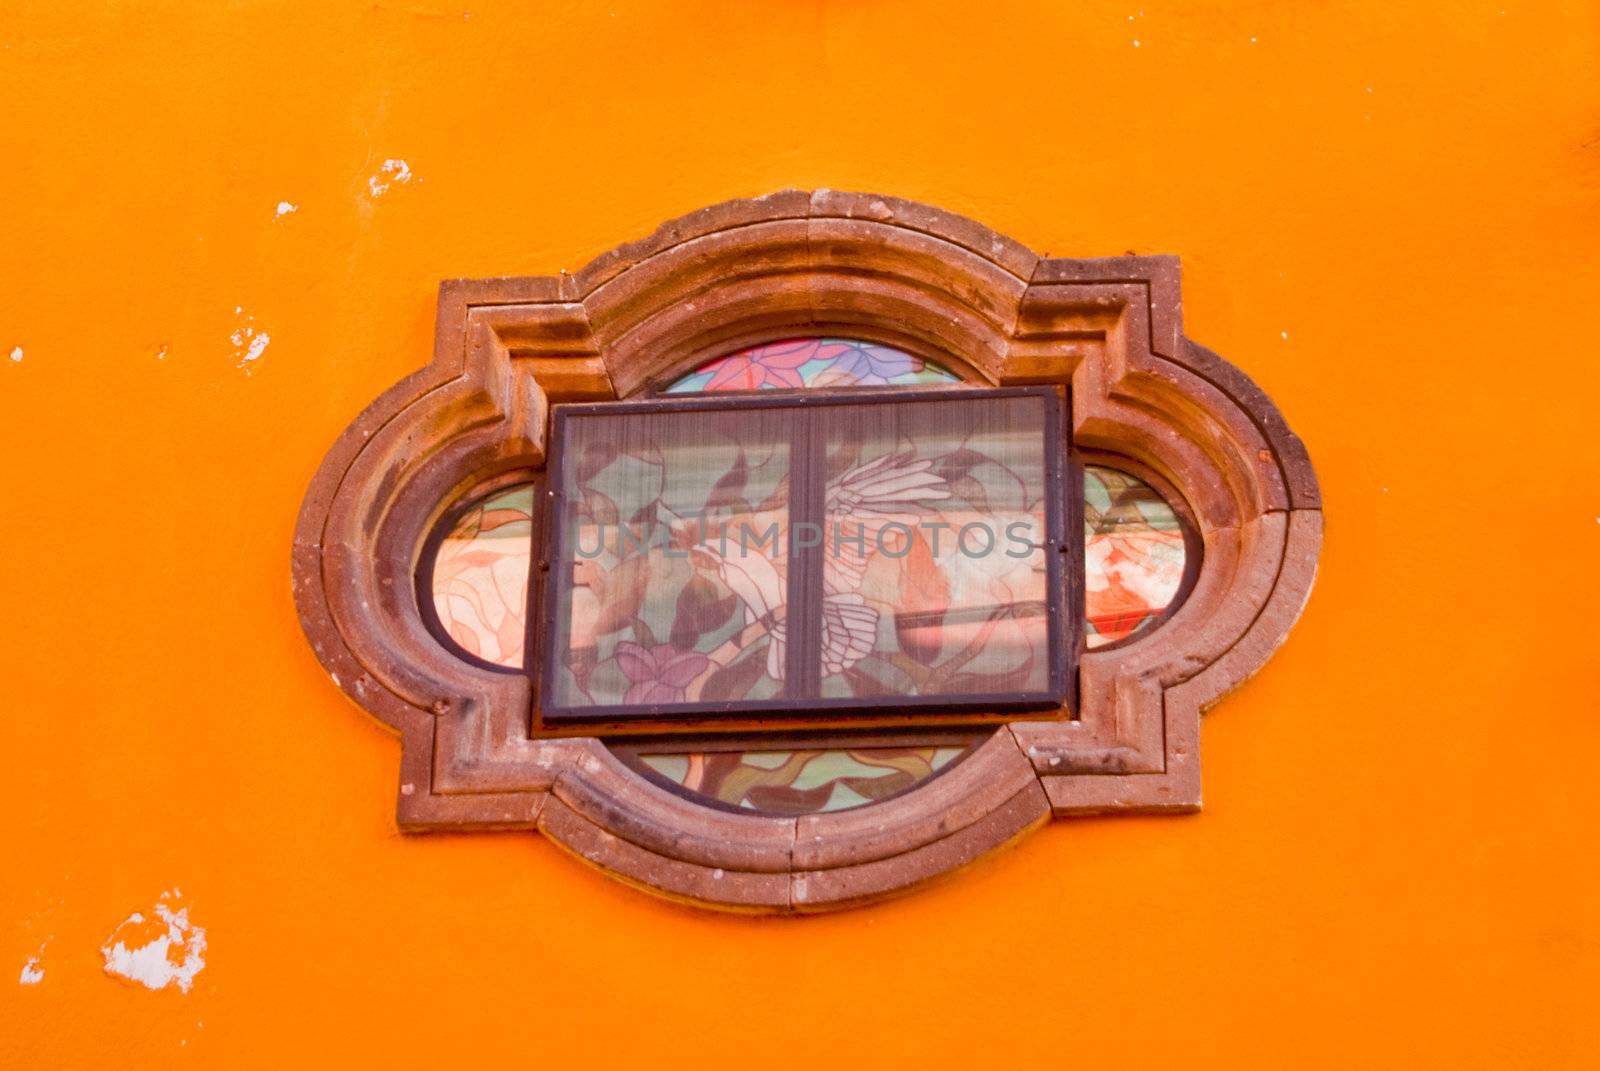 Colonial architectured window of Mexico